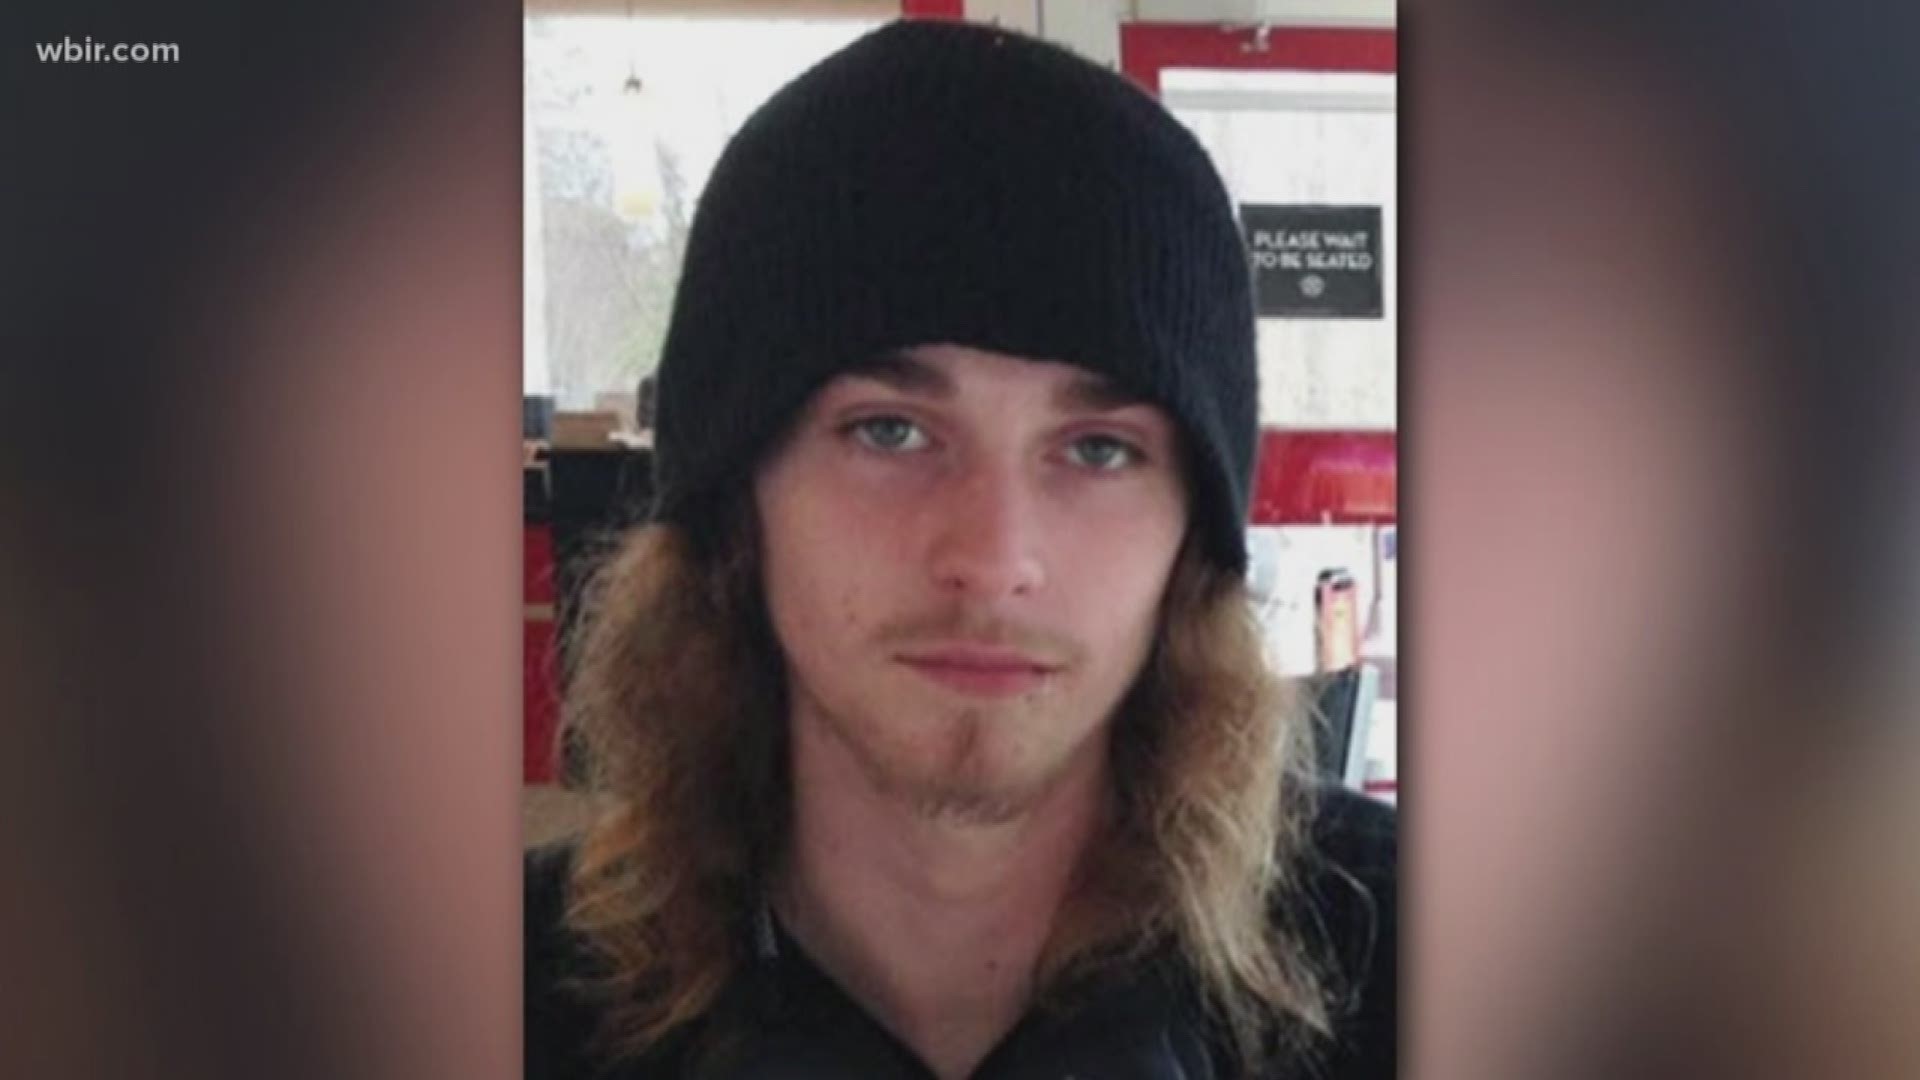 16-year-old Ryan Haley's body was found near Tellico Plains after he had been missing for 10 days.